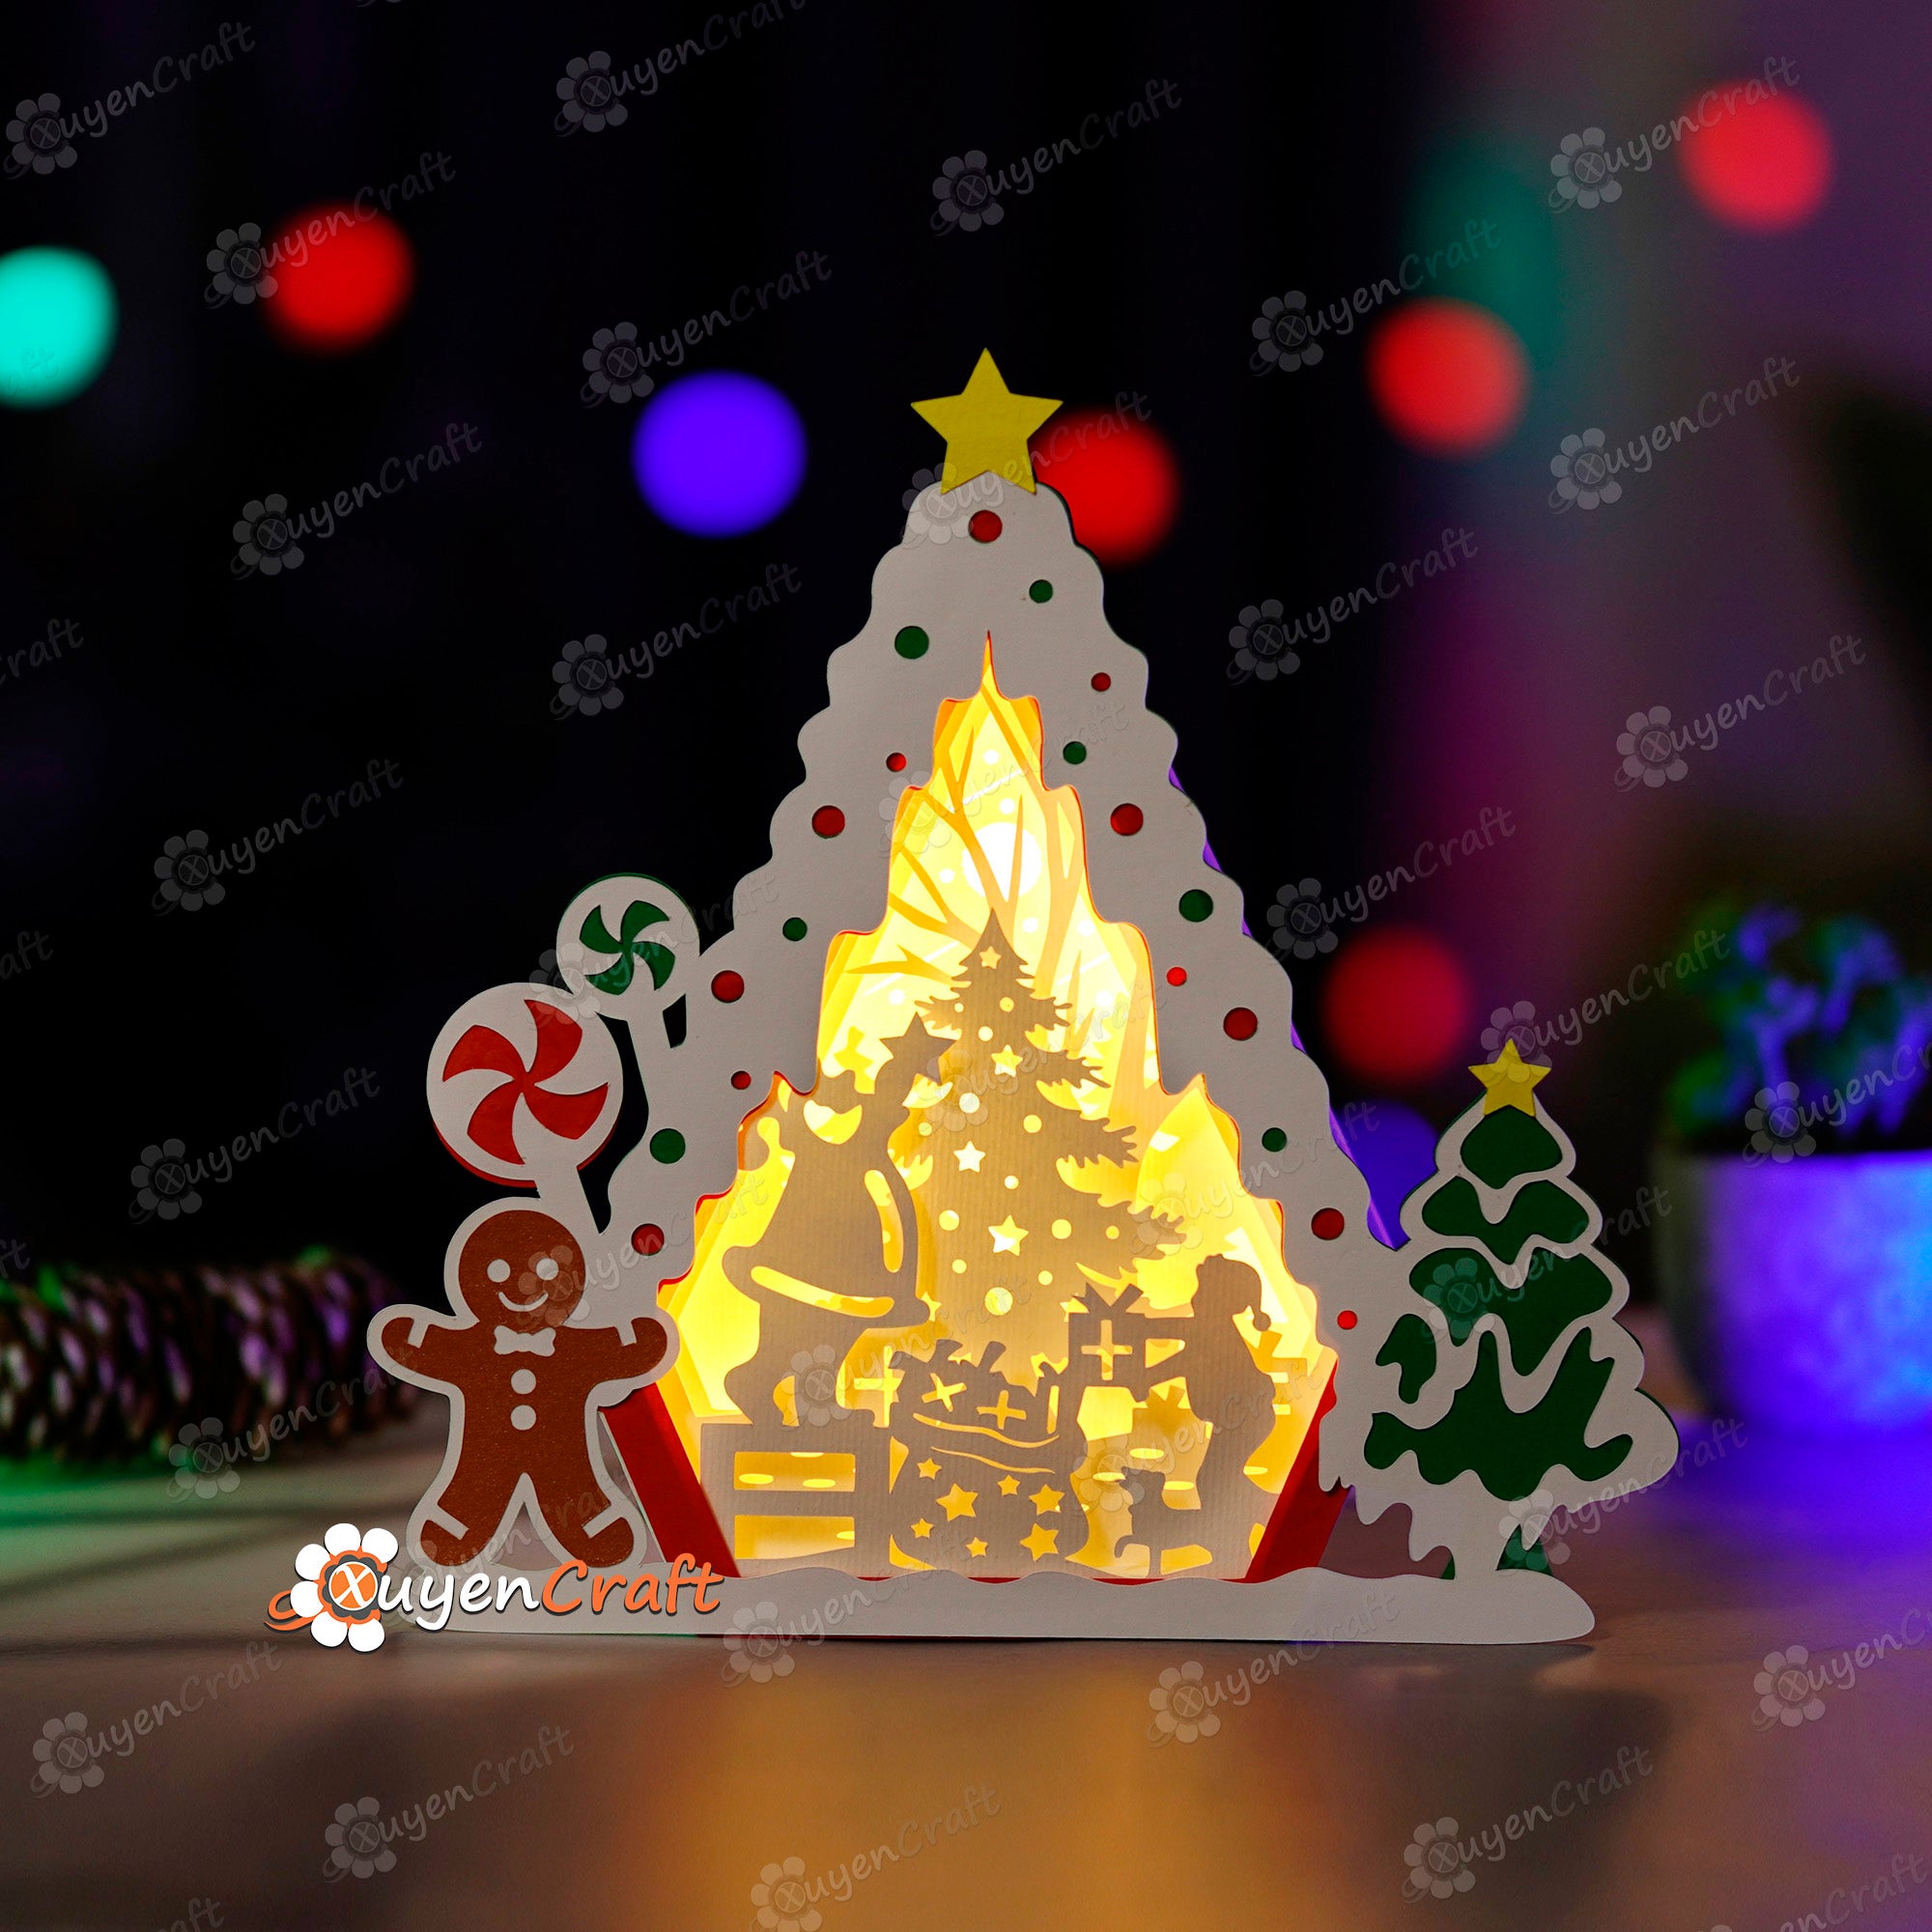 Santa's Christmas Trees in Gingerbread House Shadow Box SVG Light Box - Candy House Christmas Lantern, Paper Cut Template, Snowman House Svg